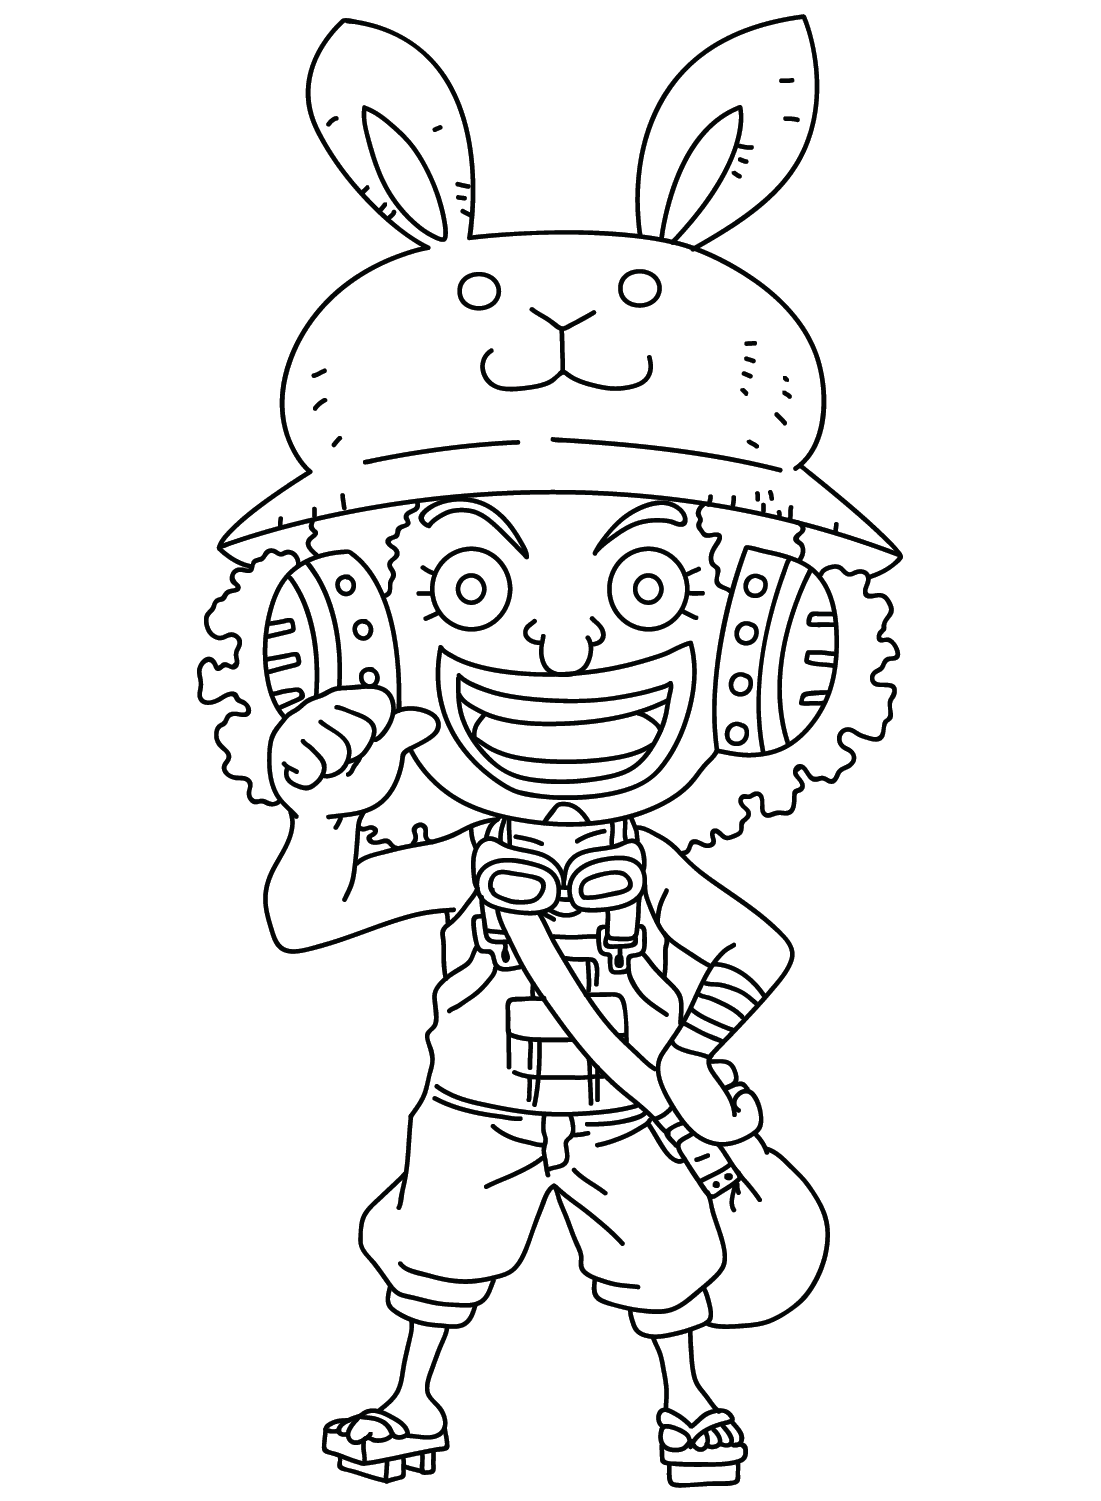 Usopp Coloring Pages to for Kids